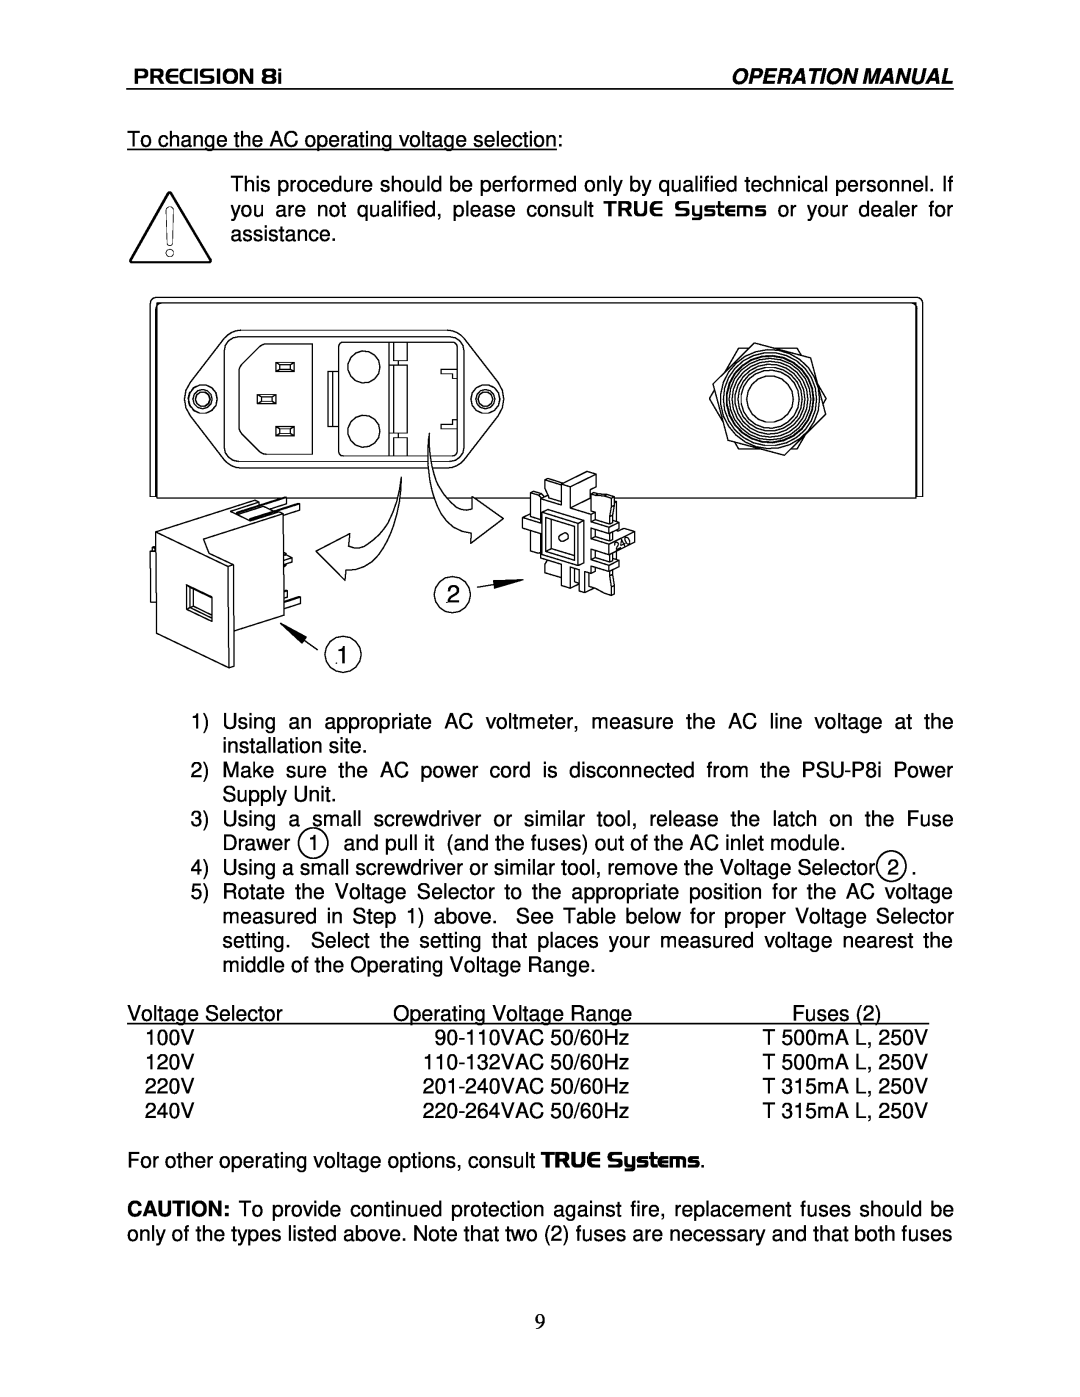 True Manufacturing Company PRECISION 8i operation manual Precision, To change the AC operating voltage selection 